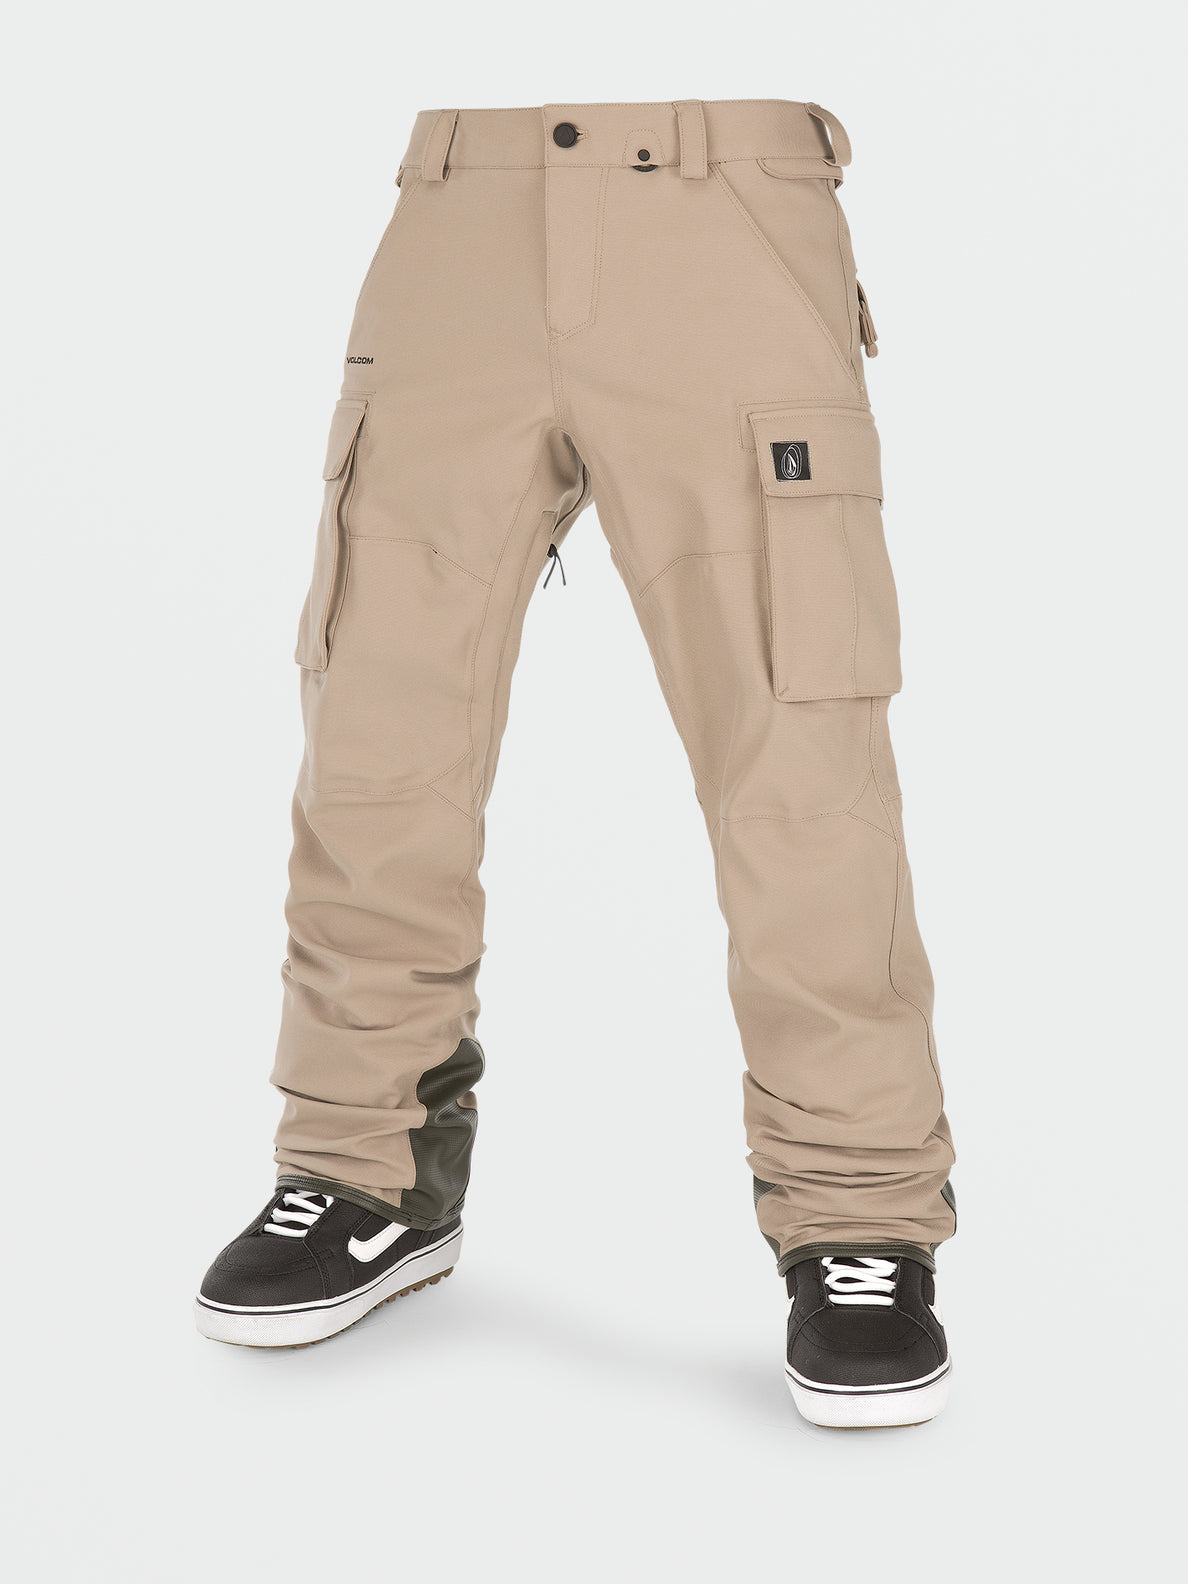 Men's New Articulated Pant